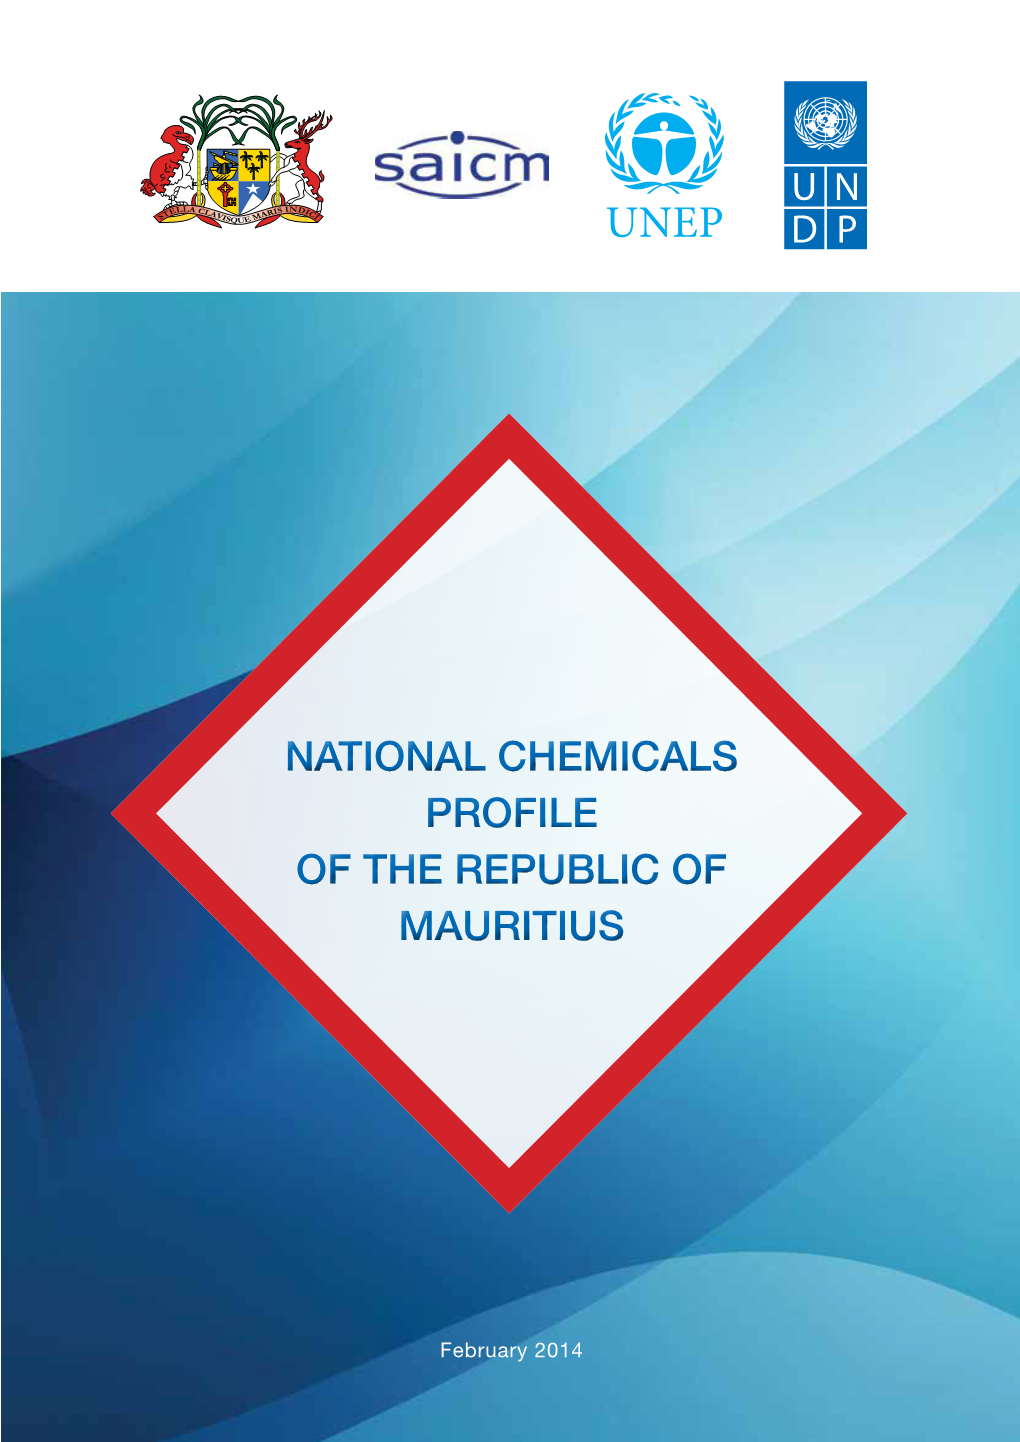 National Chemicals Profile of the Republic of Mauritius